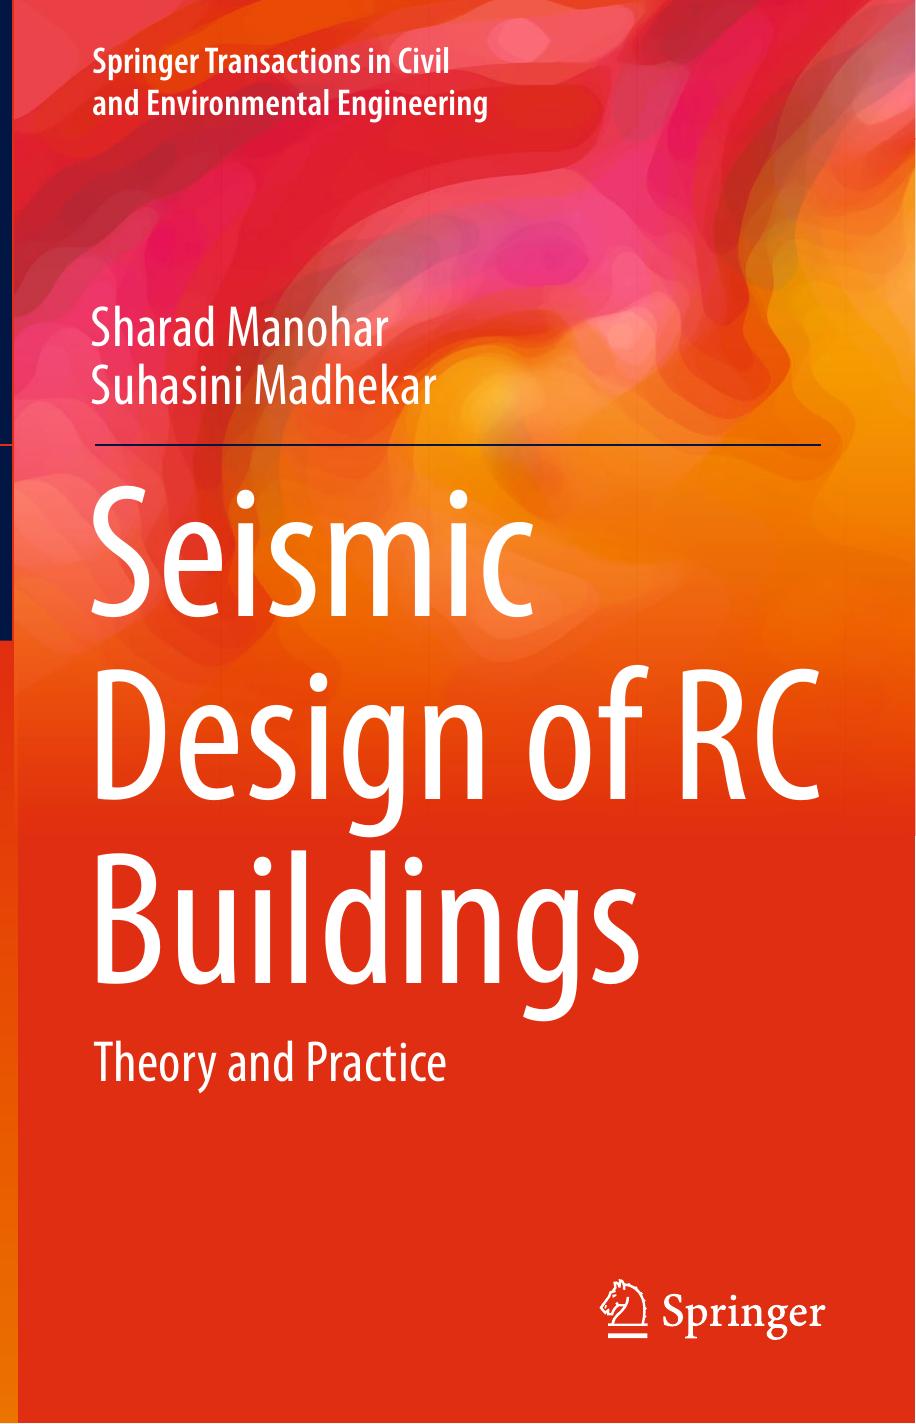 Seismic Design of RC Buildings Theory and Practice 2015